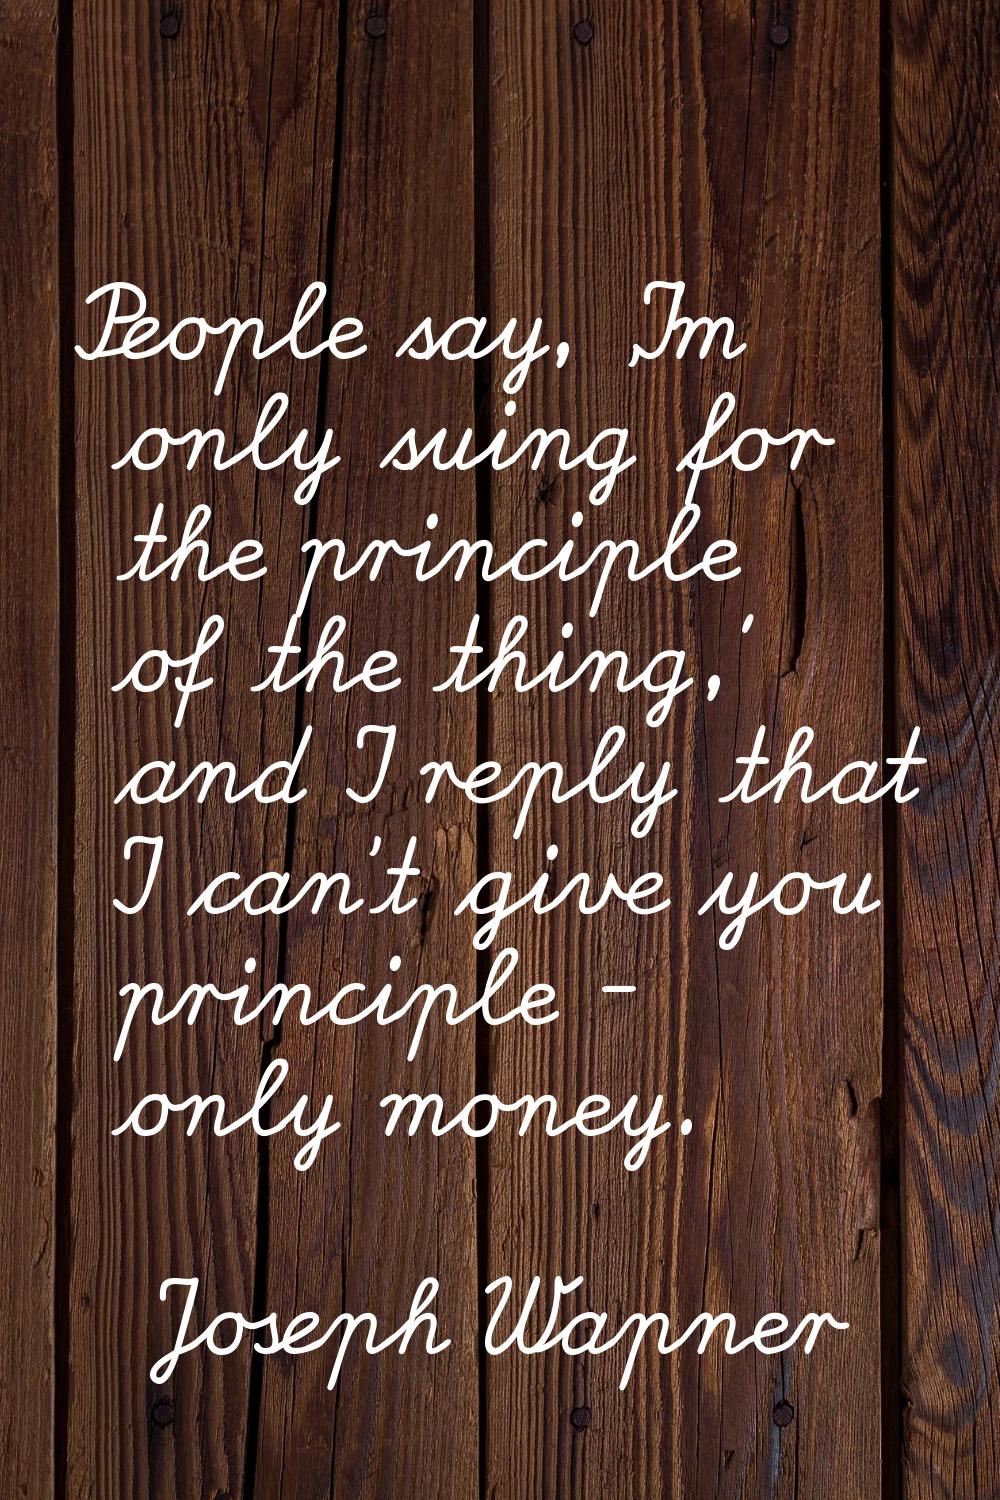 People say, 'I'm only suing for the principle of the thing,' and I reply that I can't give you prin